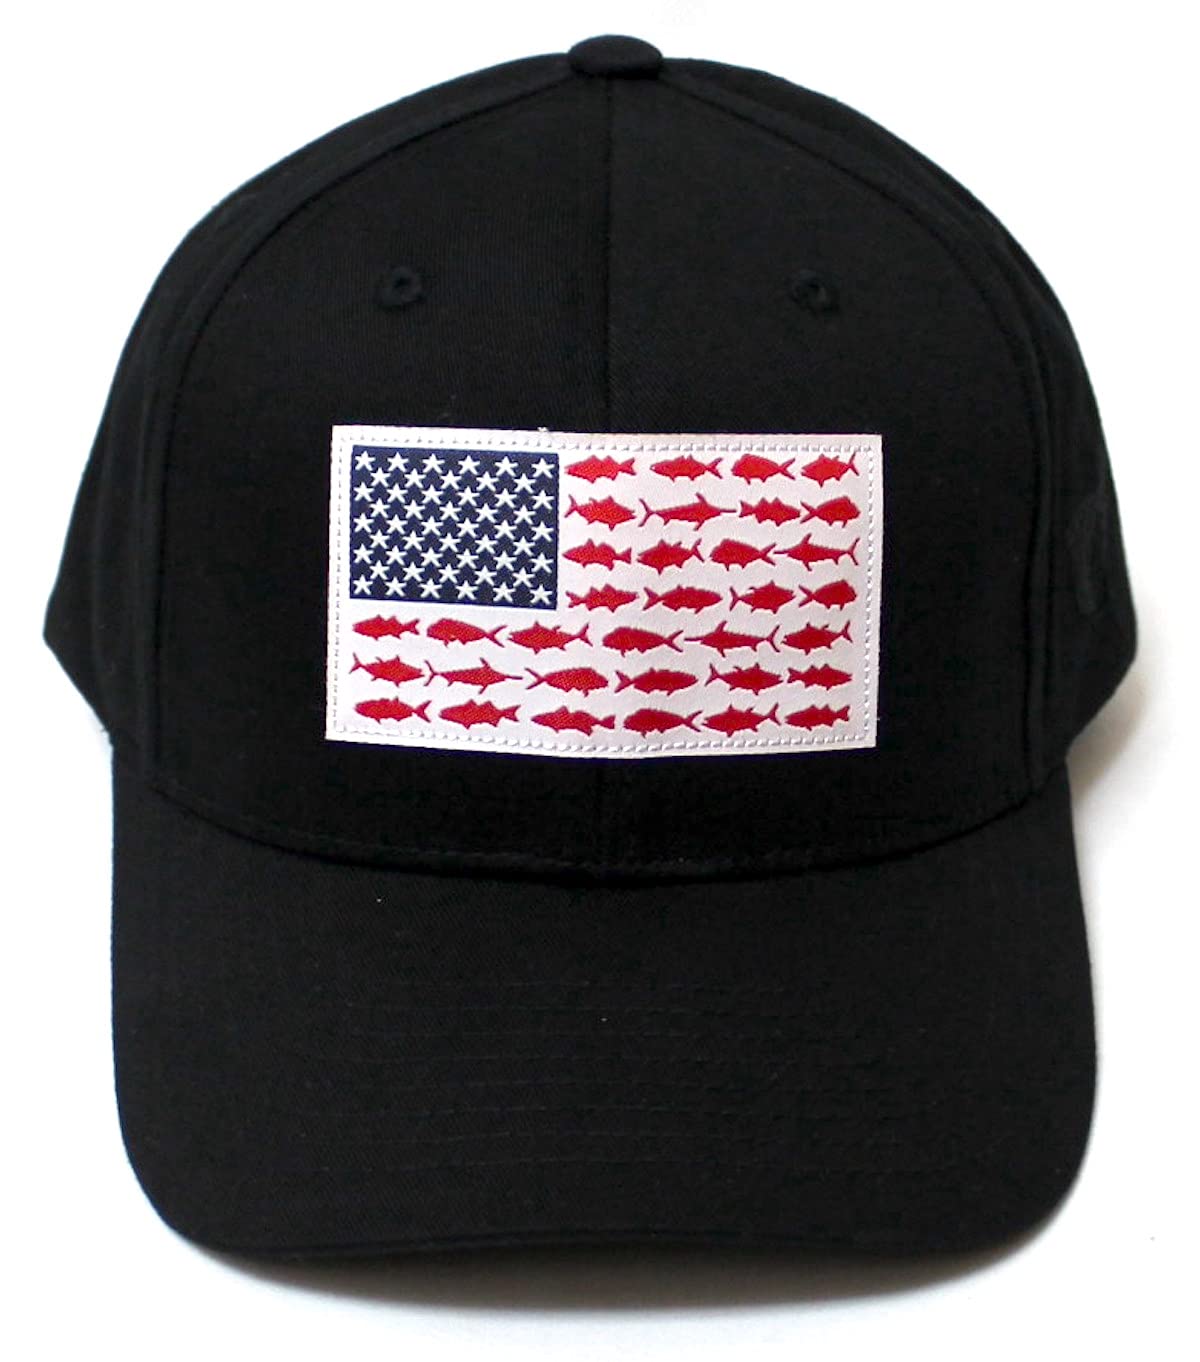 Unisex Fishing Ballcap American Flag Patch Embroidery Red Fish Monogram Detail, Black